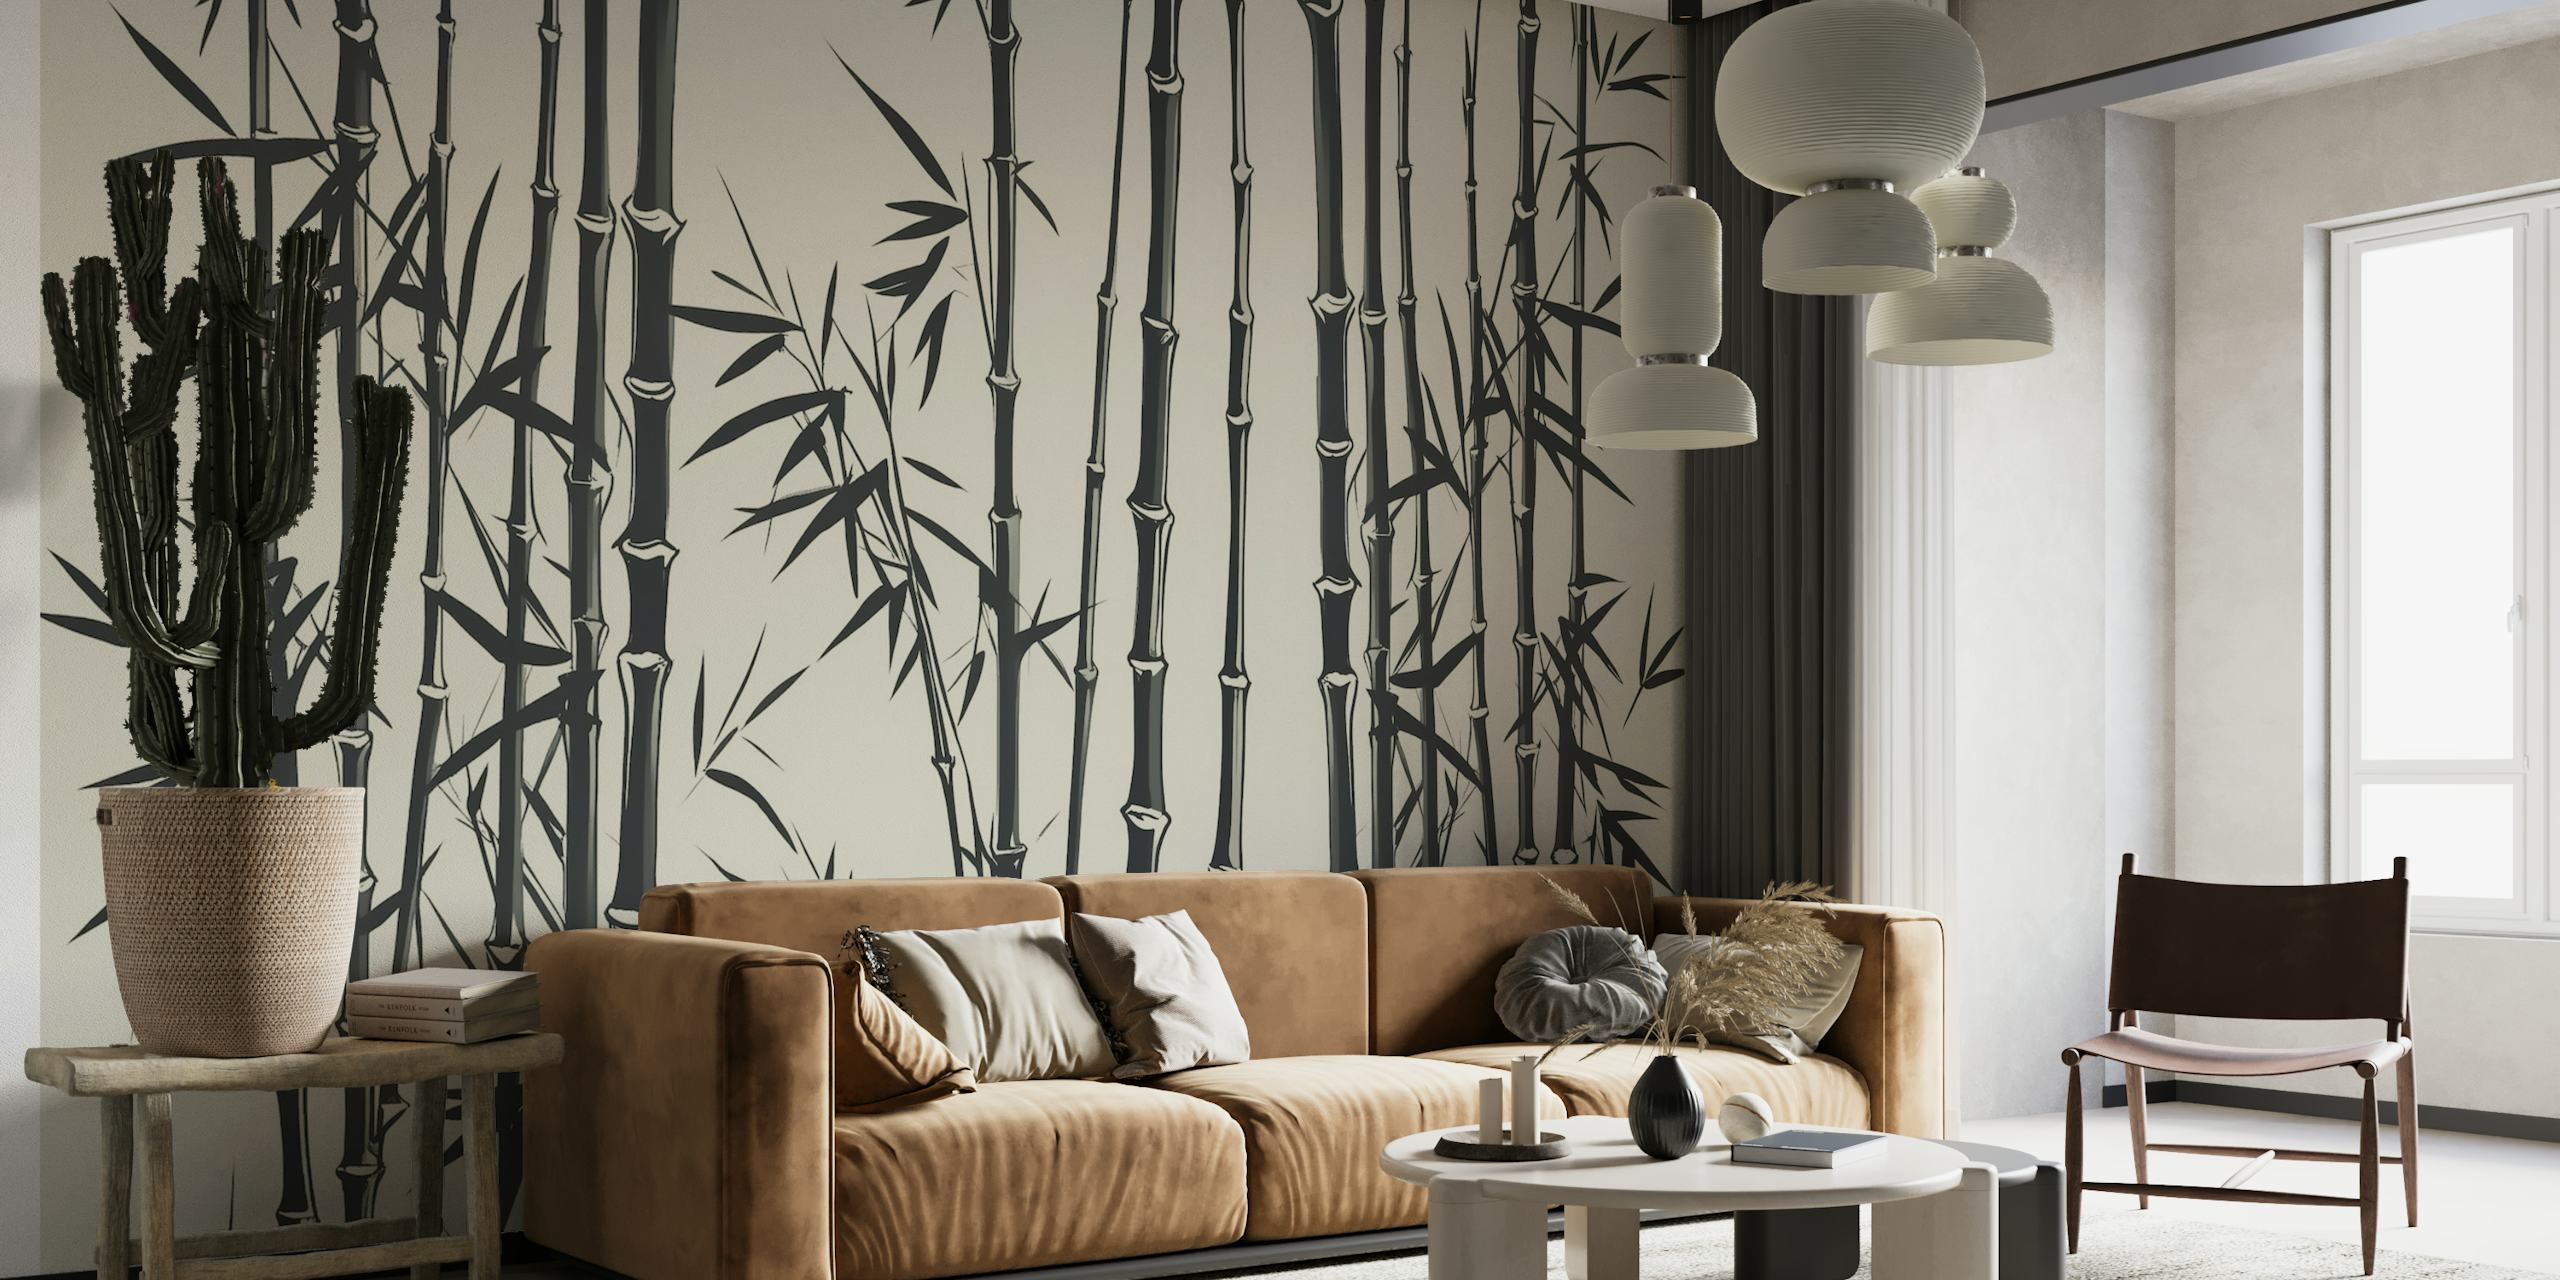 Art Deco-style bamboo grass wall mural in black and white on a creme background